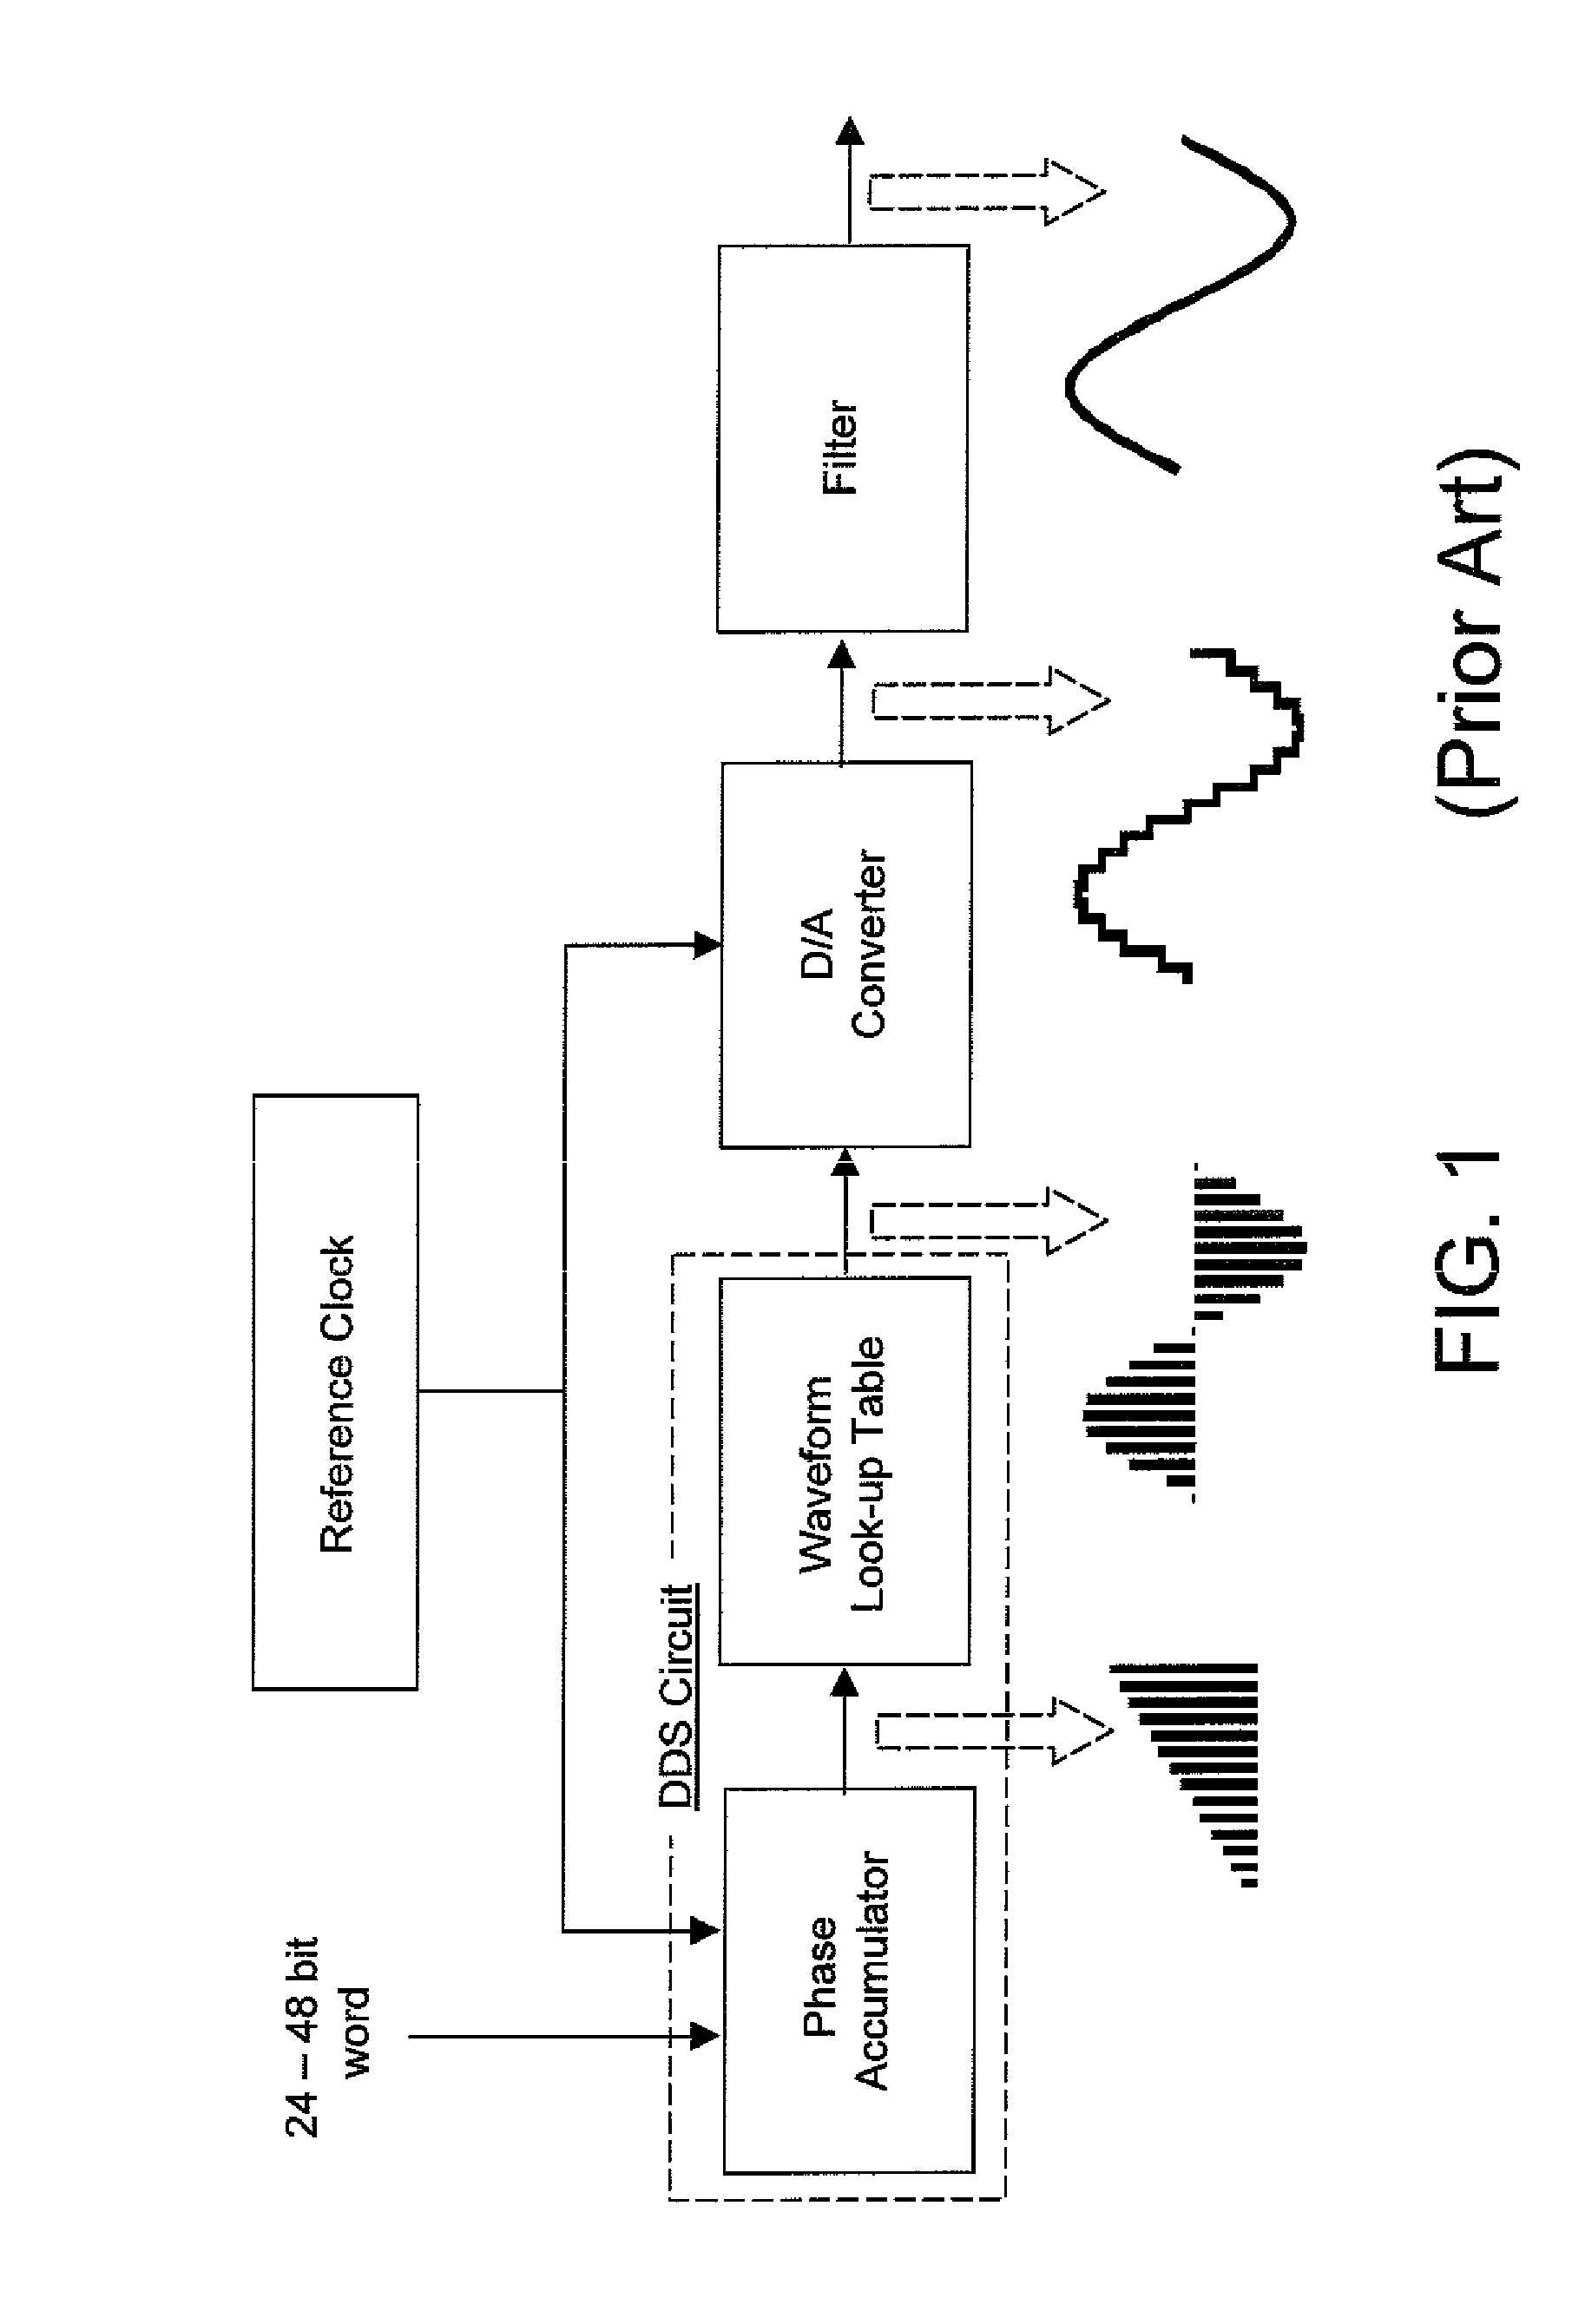 Agile high resolution arbitrary waveform generator with jitterless frequency stepping